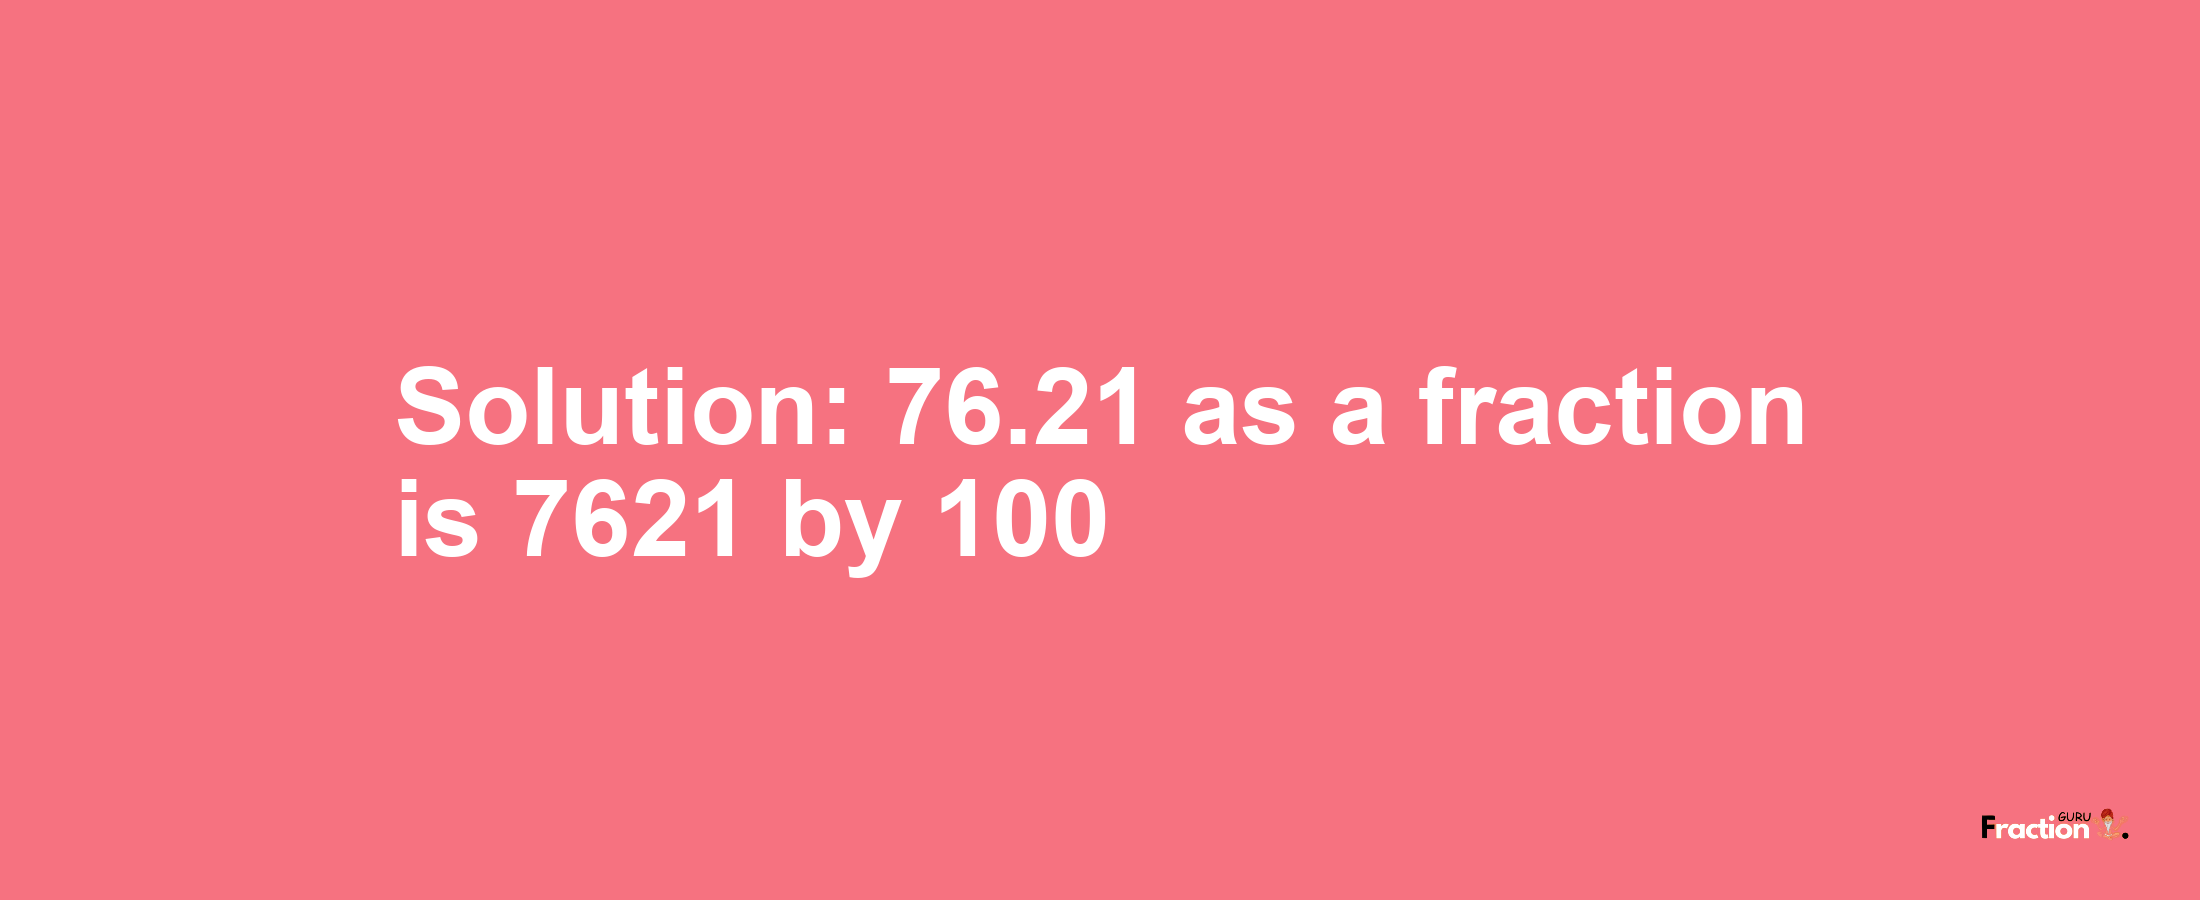 Solution:76.21 as a fraction is 7621/100